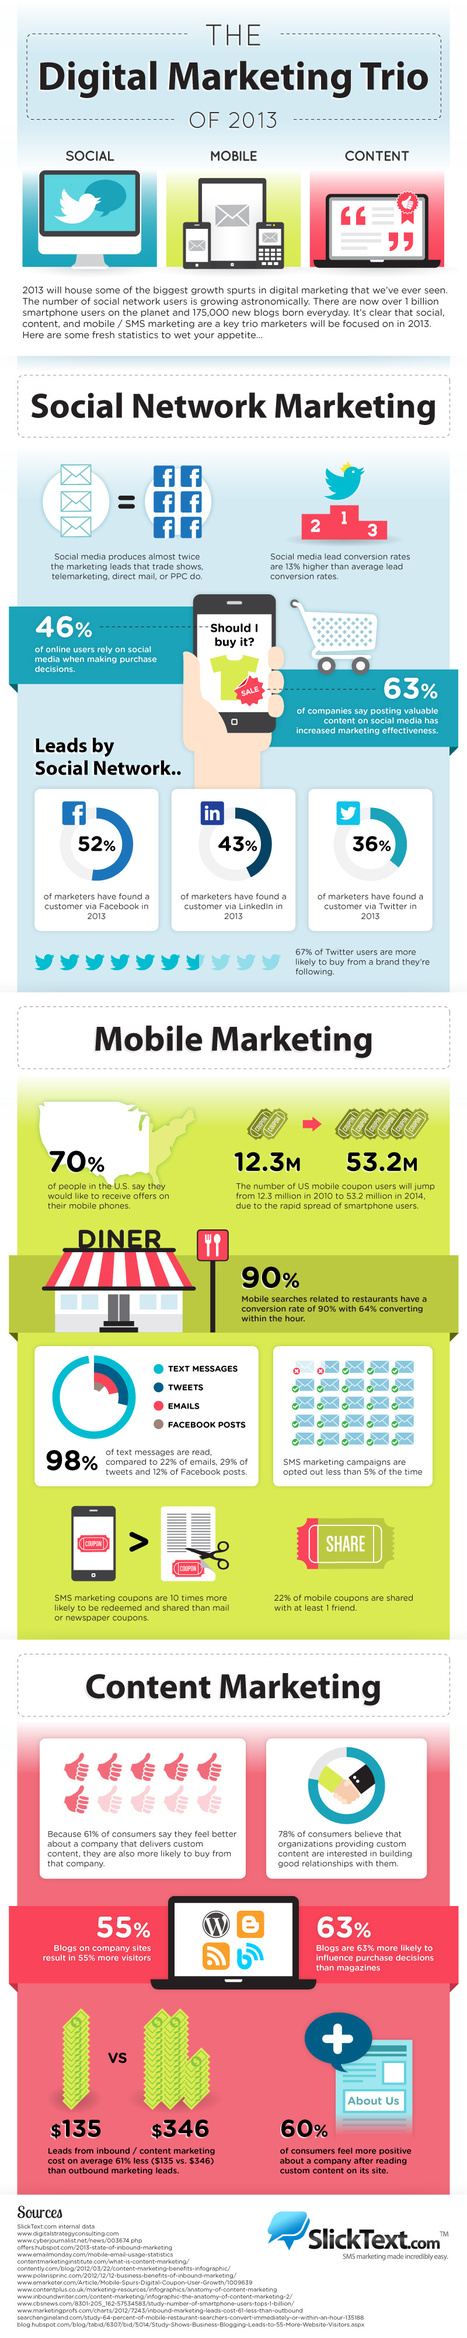 The Digital Marketing Trio Of 2013 [Infographic] | MarketingHits | Scoop.it